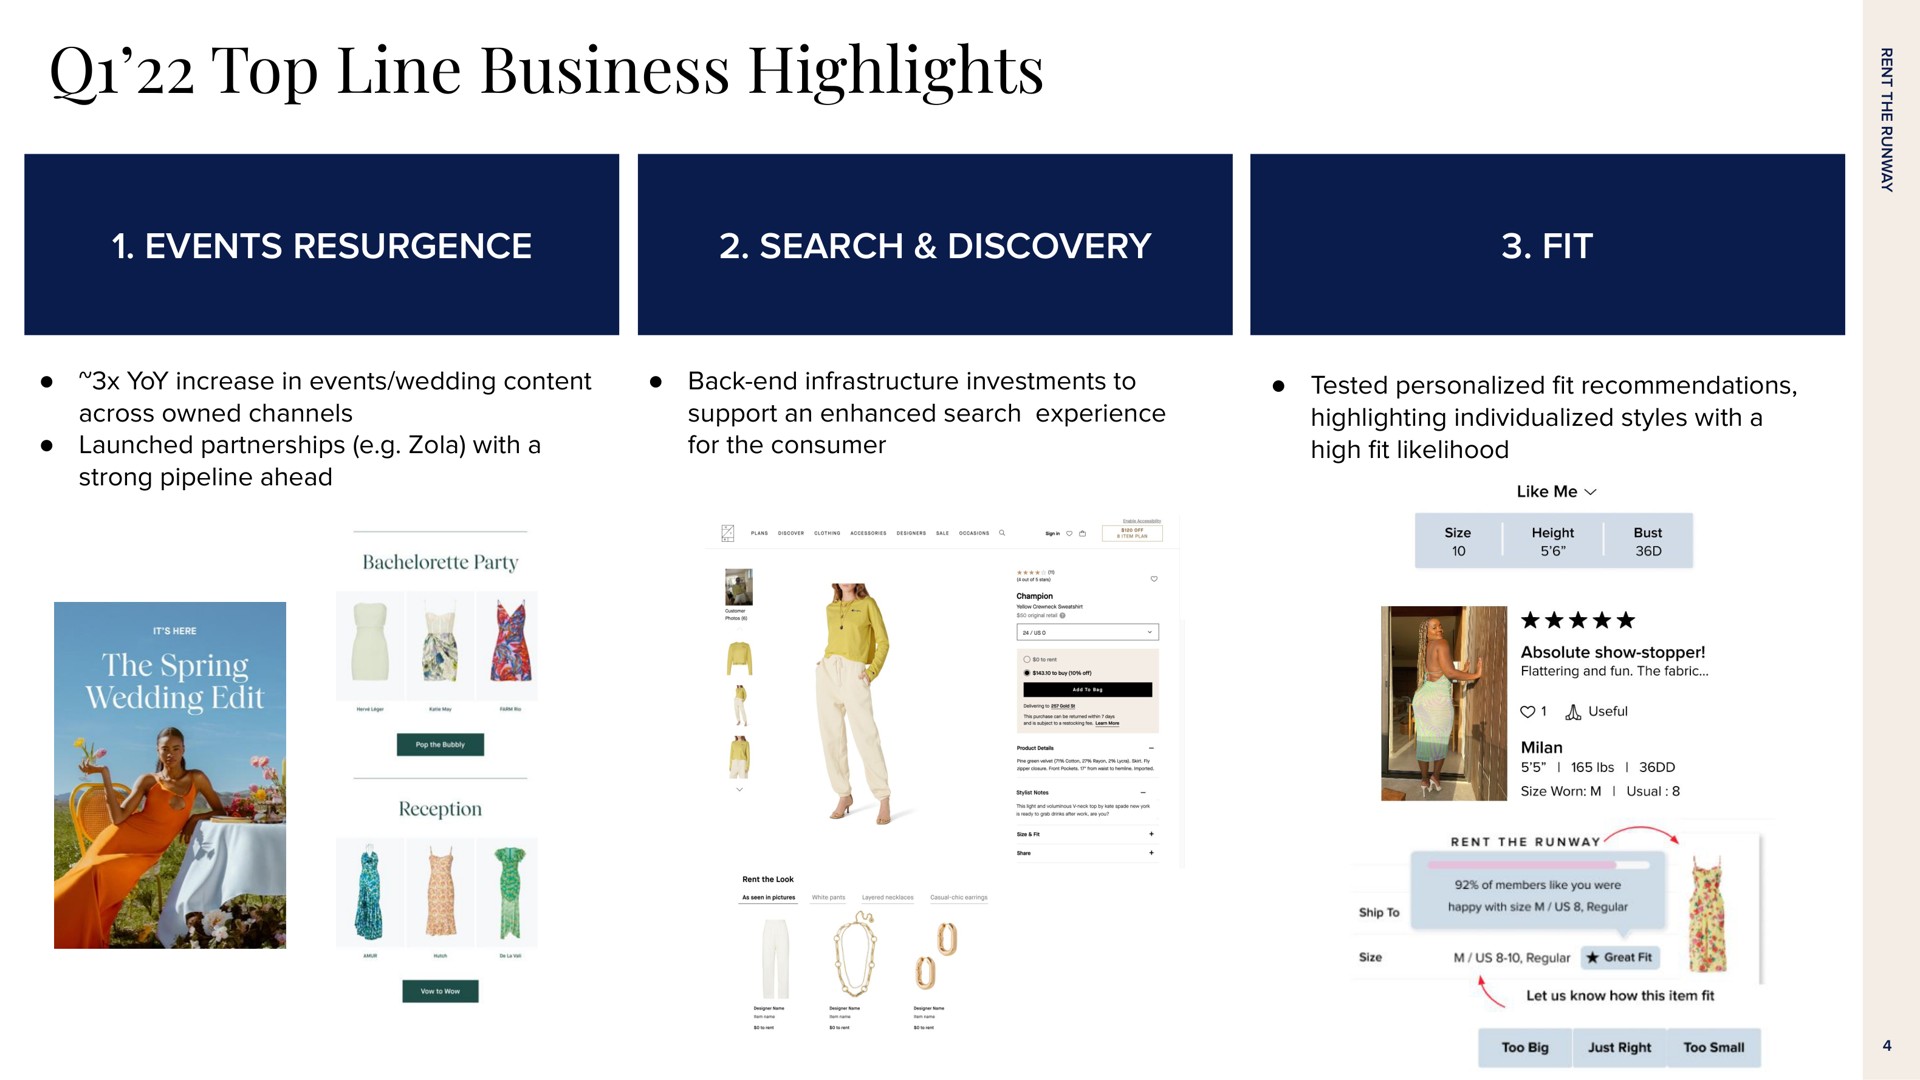 top line business highlights events resurgence search discovery fit | Rent The Runway